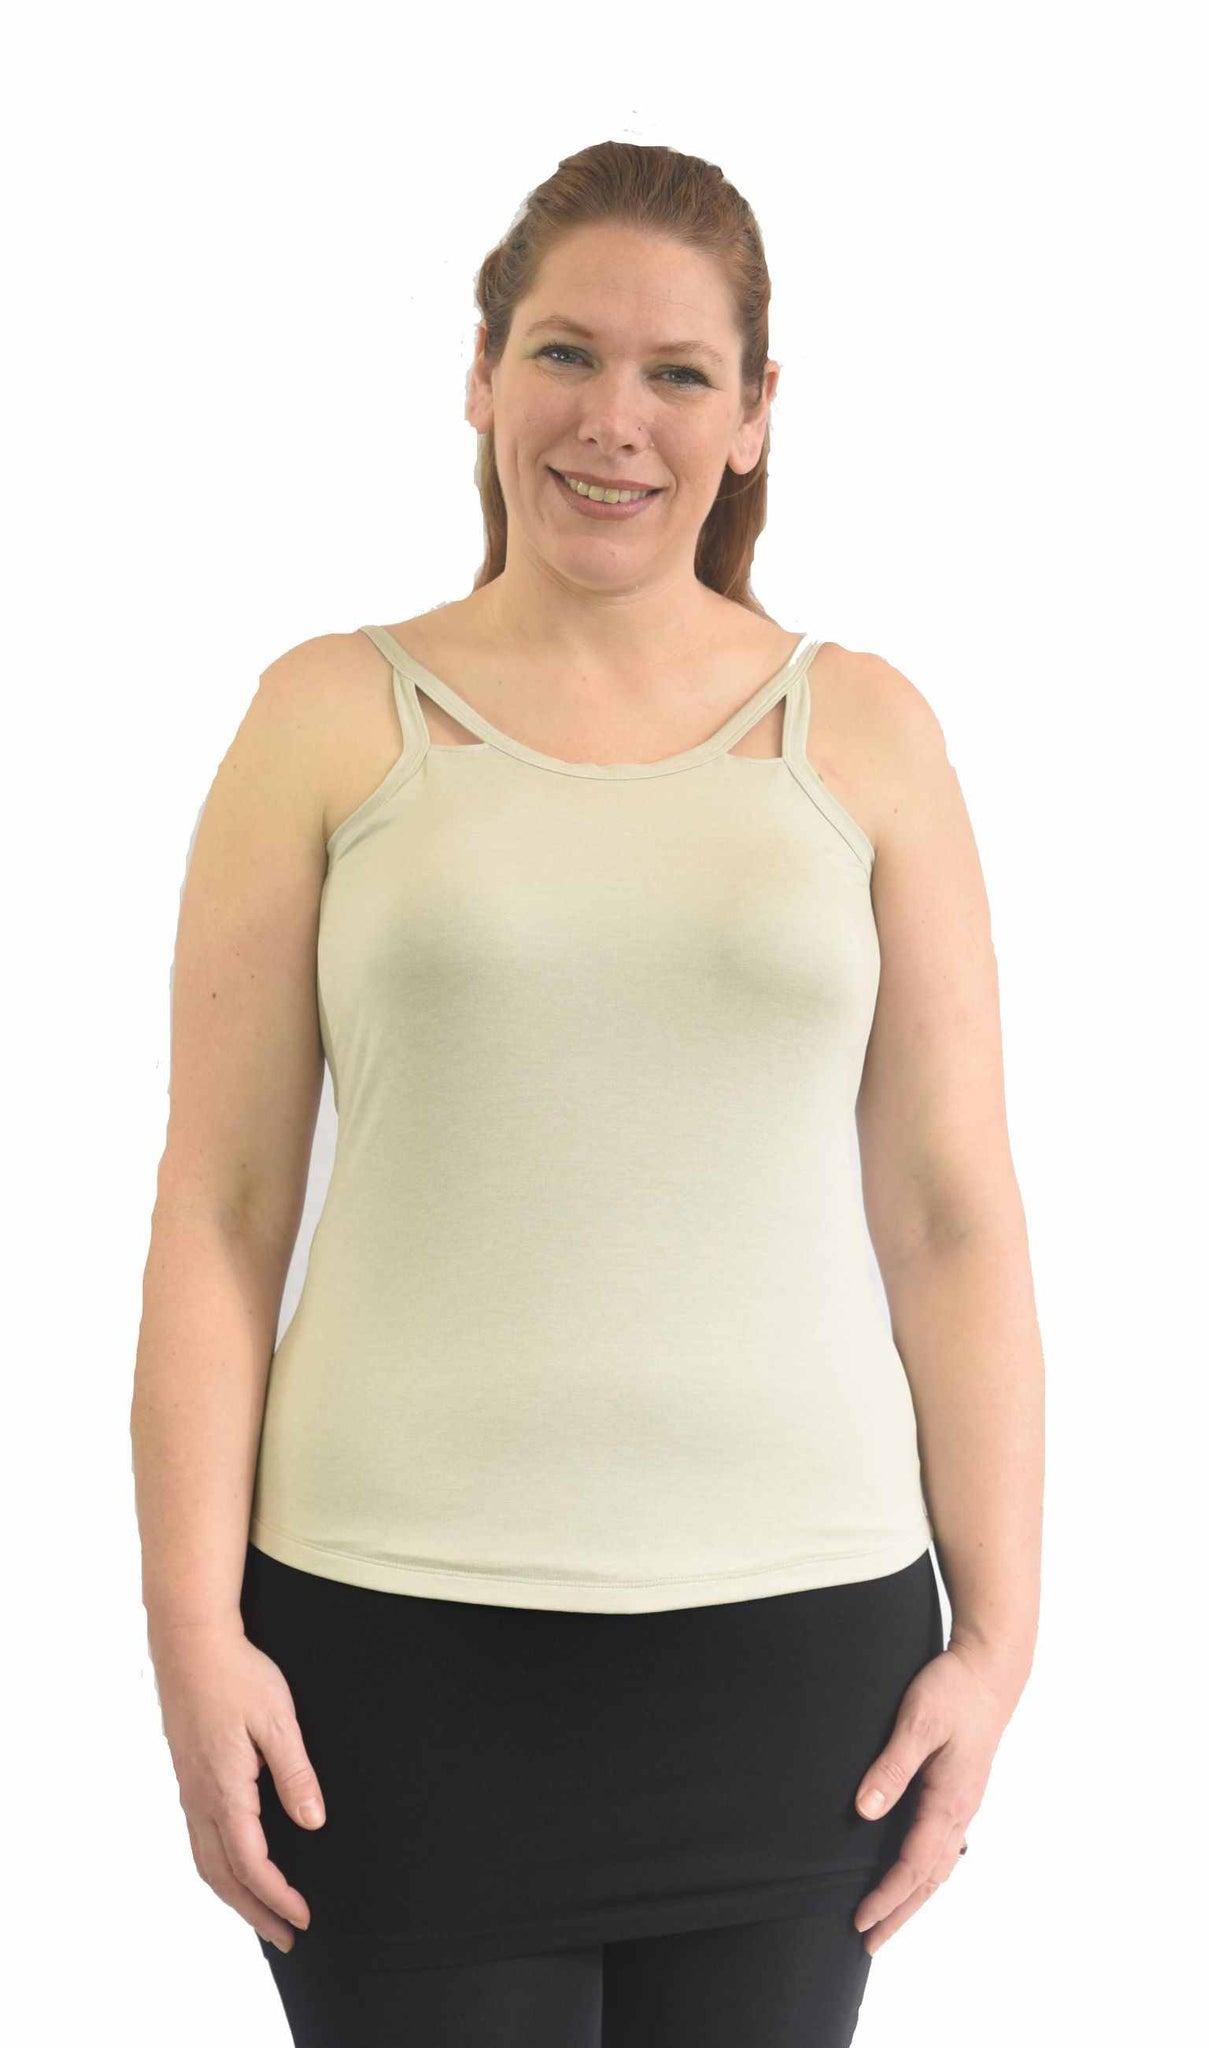 What is a Mastectomy Camisole? - Mastectomy Shop